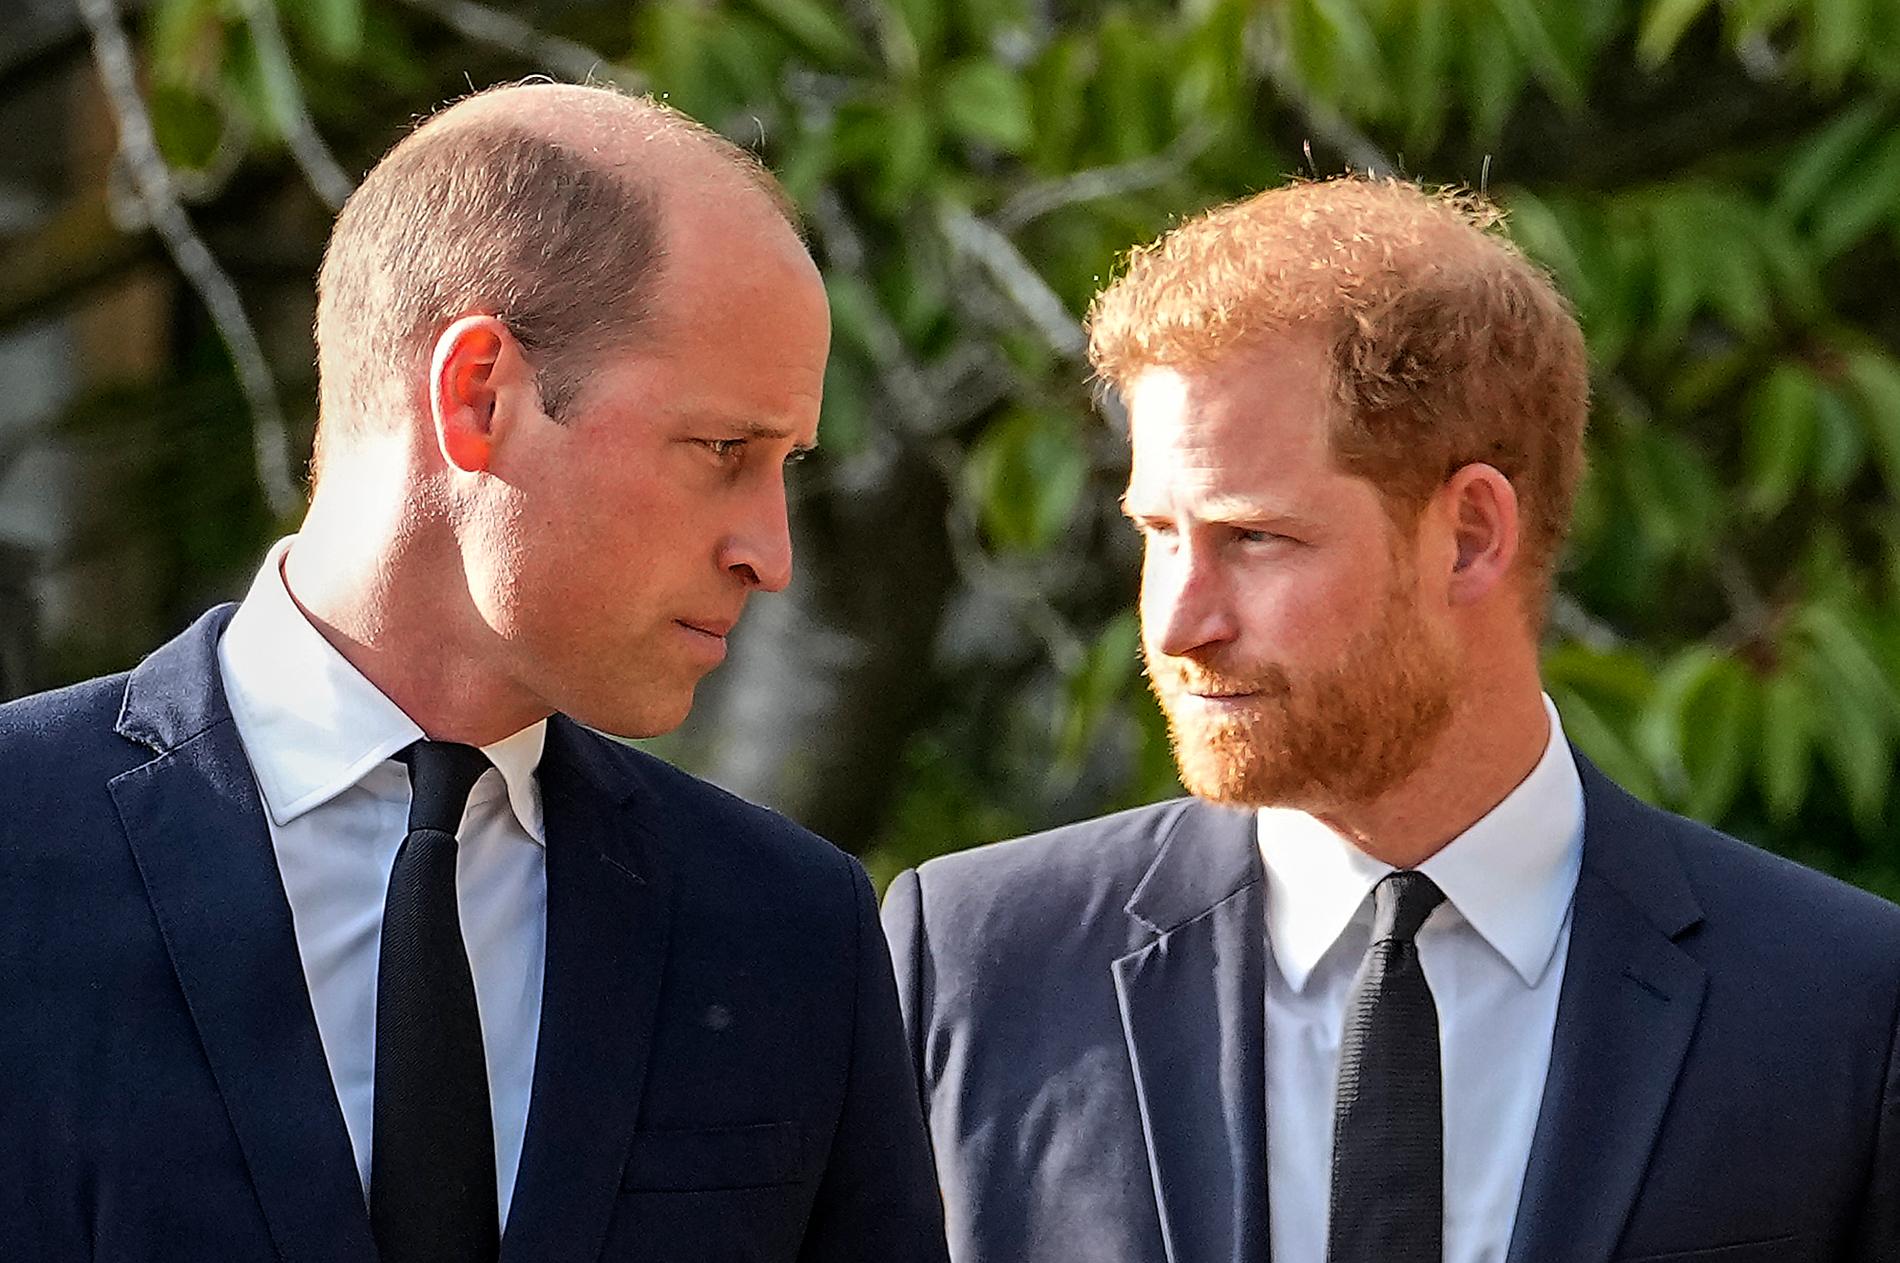 Prince Harry claims Prince William knocked him to the floor